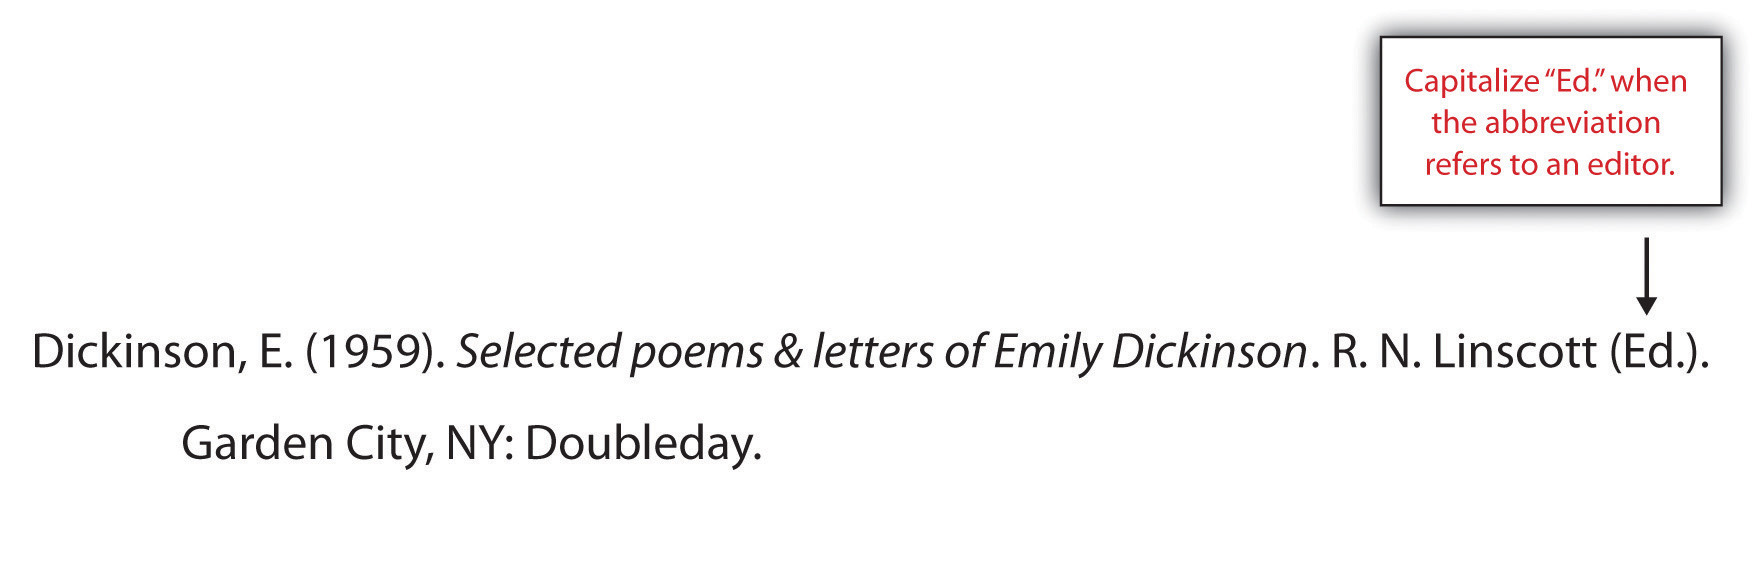 Dickinson, E. (1959). Selected poems & letters of Emily Dickinson. R. N. Linscott (Ed.). Garden City, NY: Doubleday.